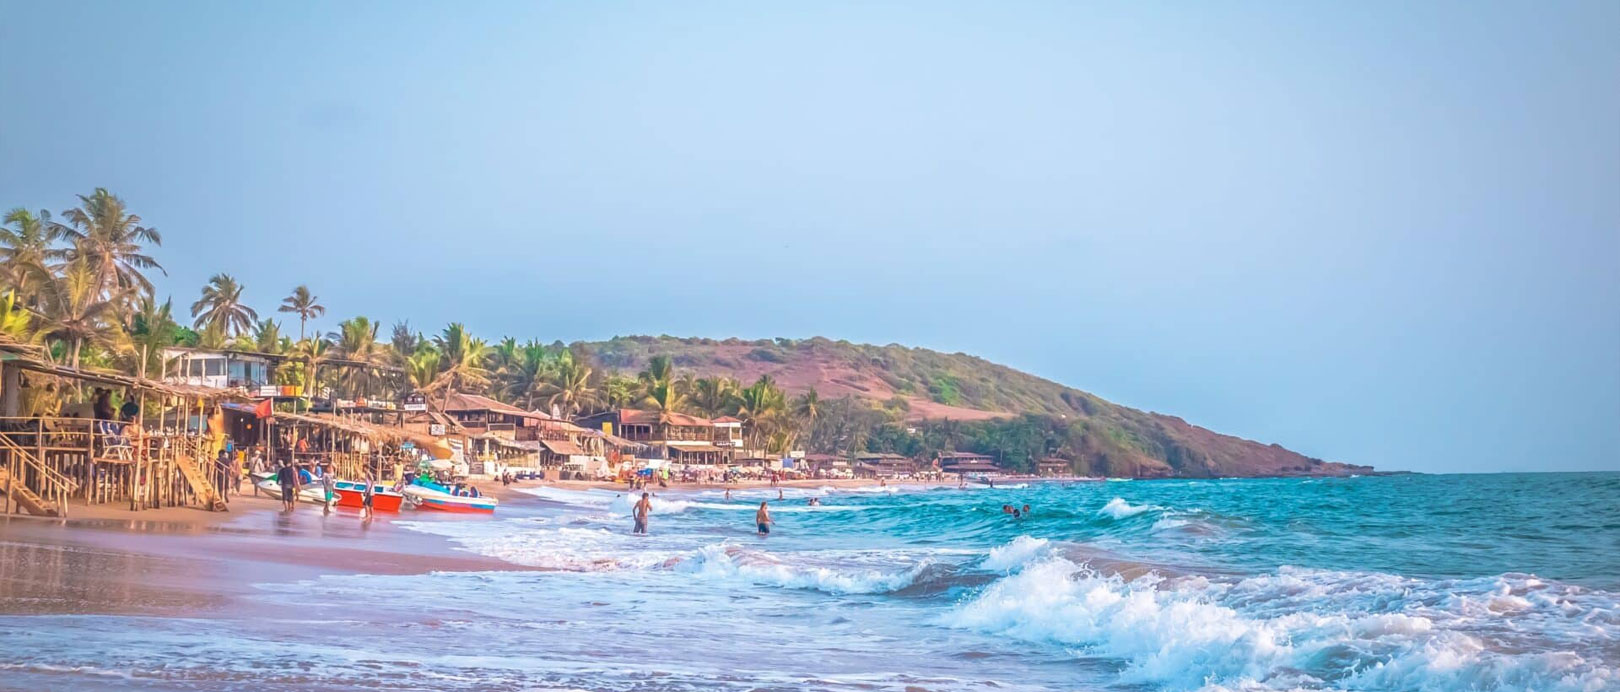 7 of the Best Beaches in Goa for Nightlife travel